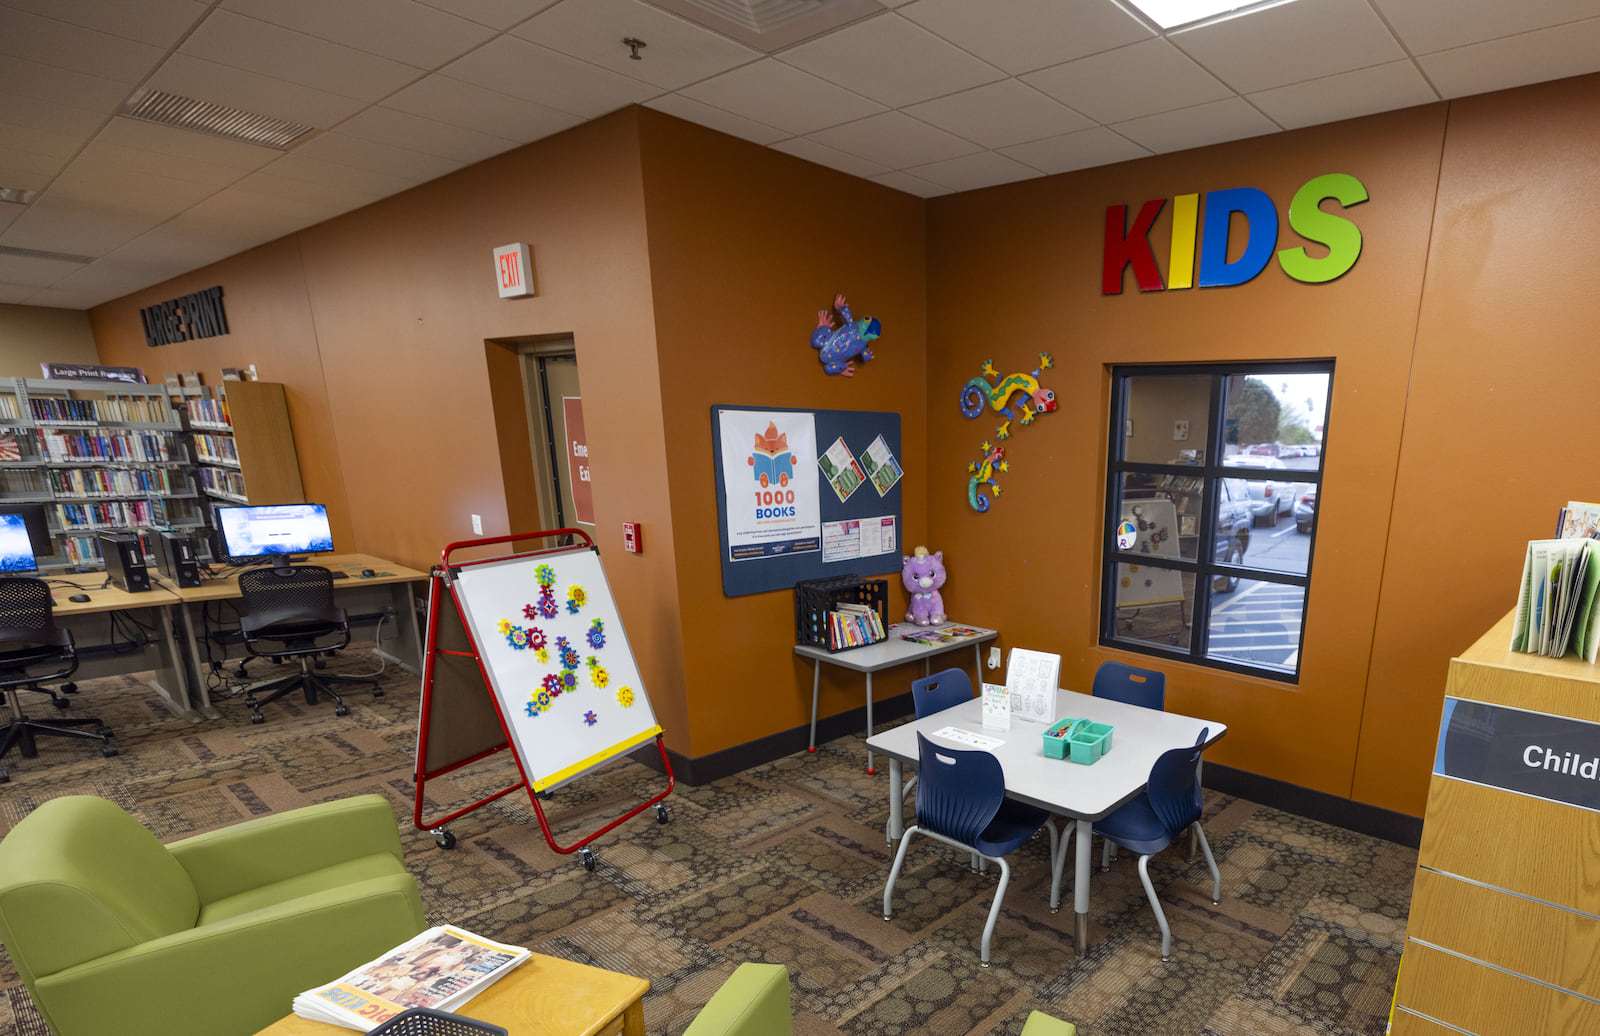 Photo of the kid's area of the library